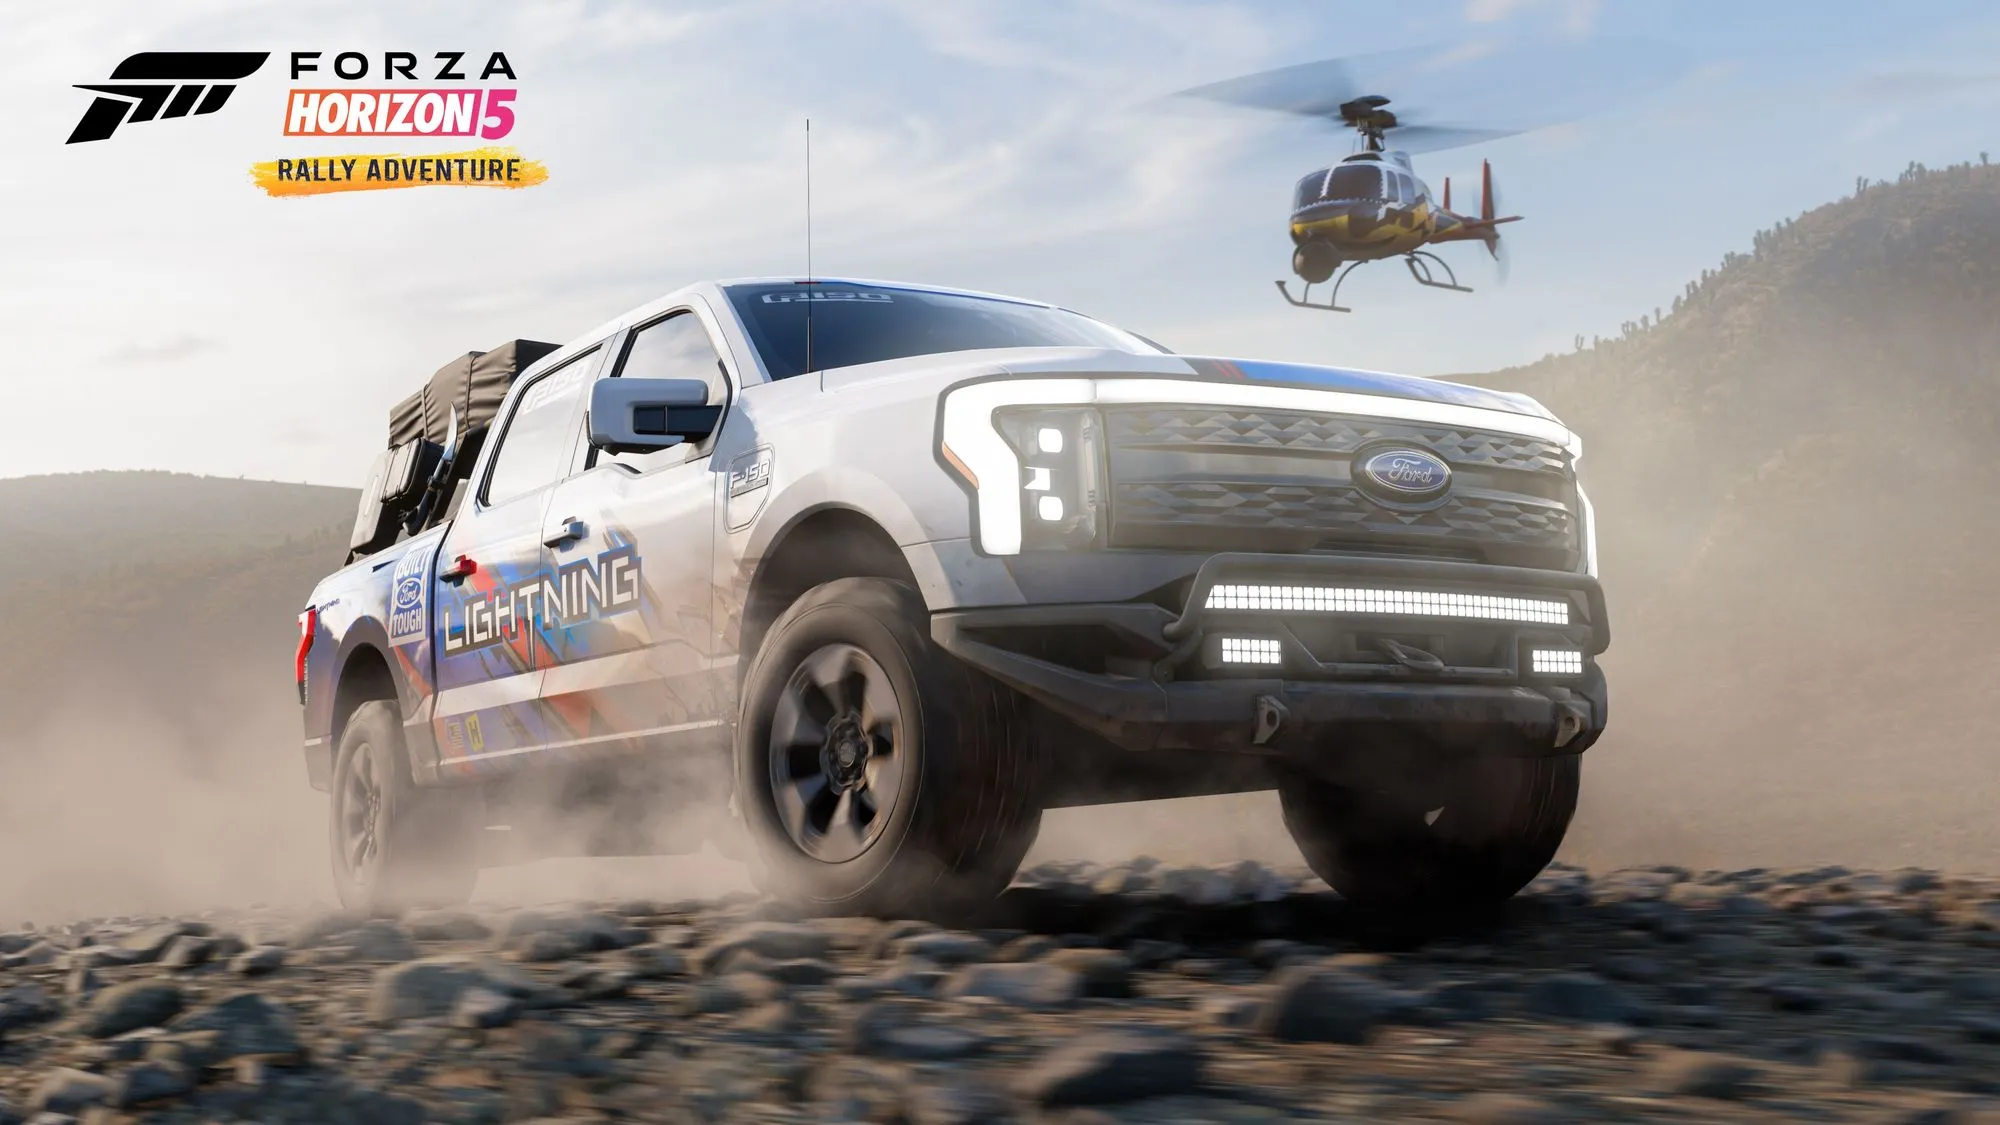 Forza Horizon 5 Rally Adventure - Release Date, Features, and More